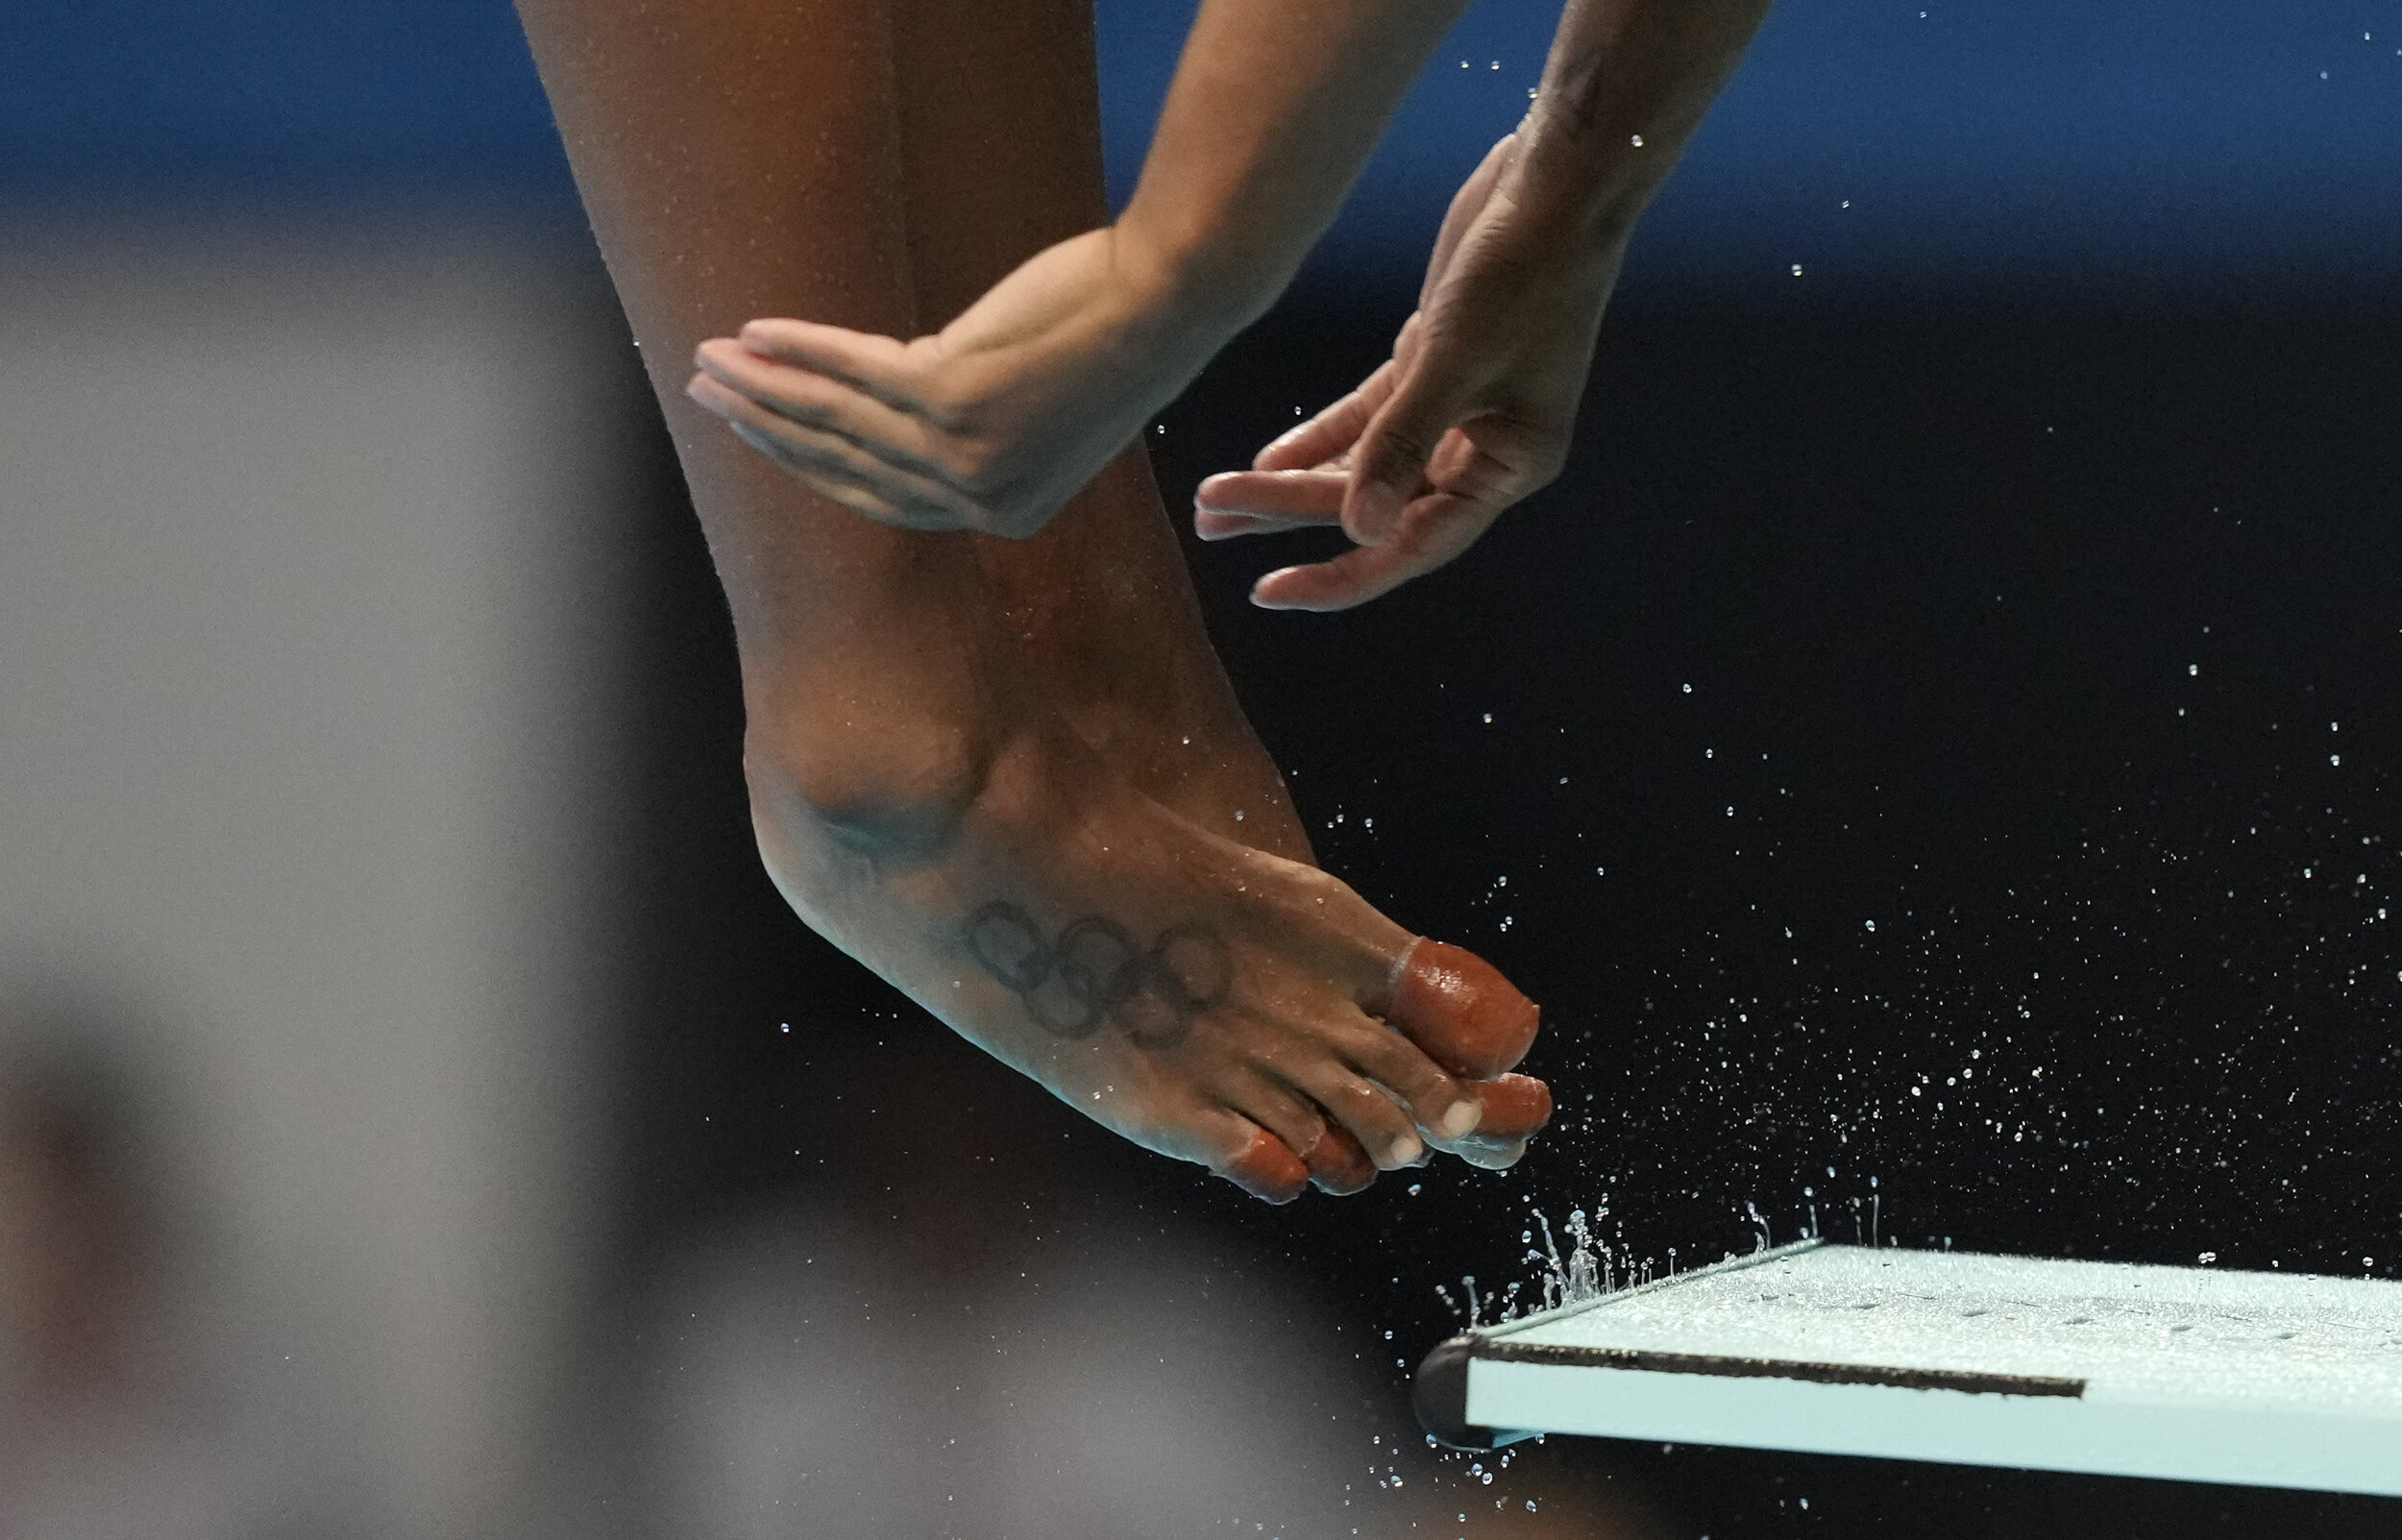  Jennifer Abel of Canada competes in women's diving 3-meter springboard final at the Tokyo Aquatics Centre at the 2020 Summer Olympics, Sunday, Aug. 1, 2021, in Tokyo, Japan. (AP Photo/Dmitri Lovetsky) 